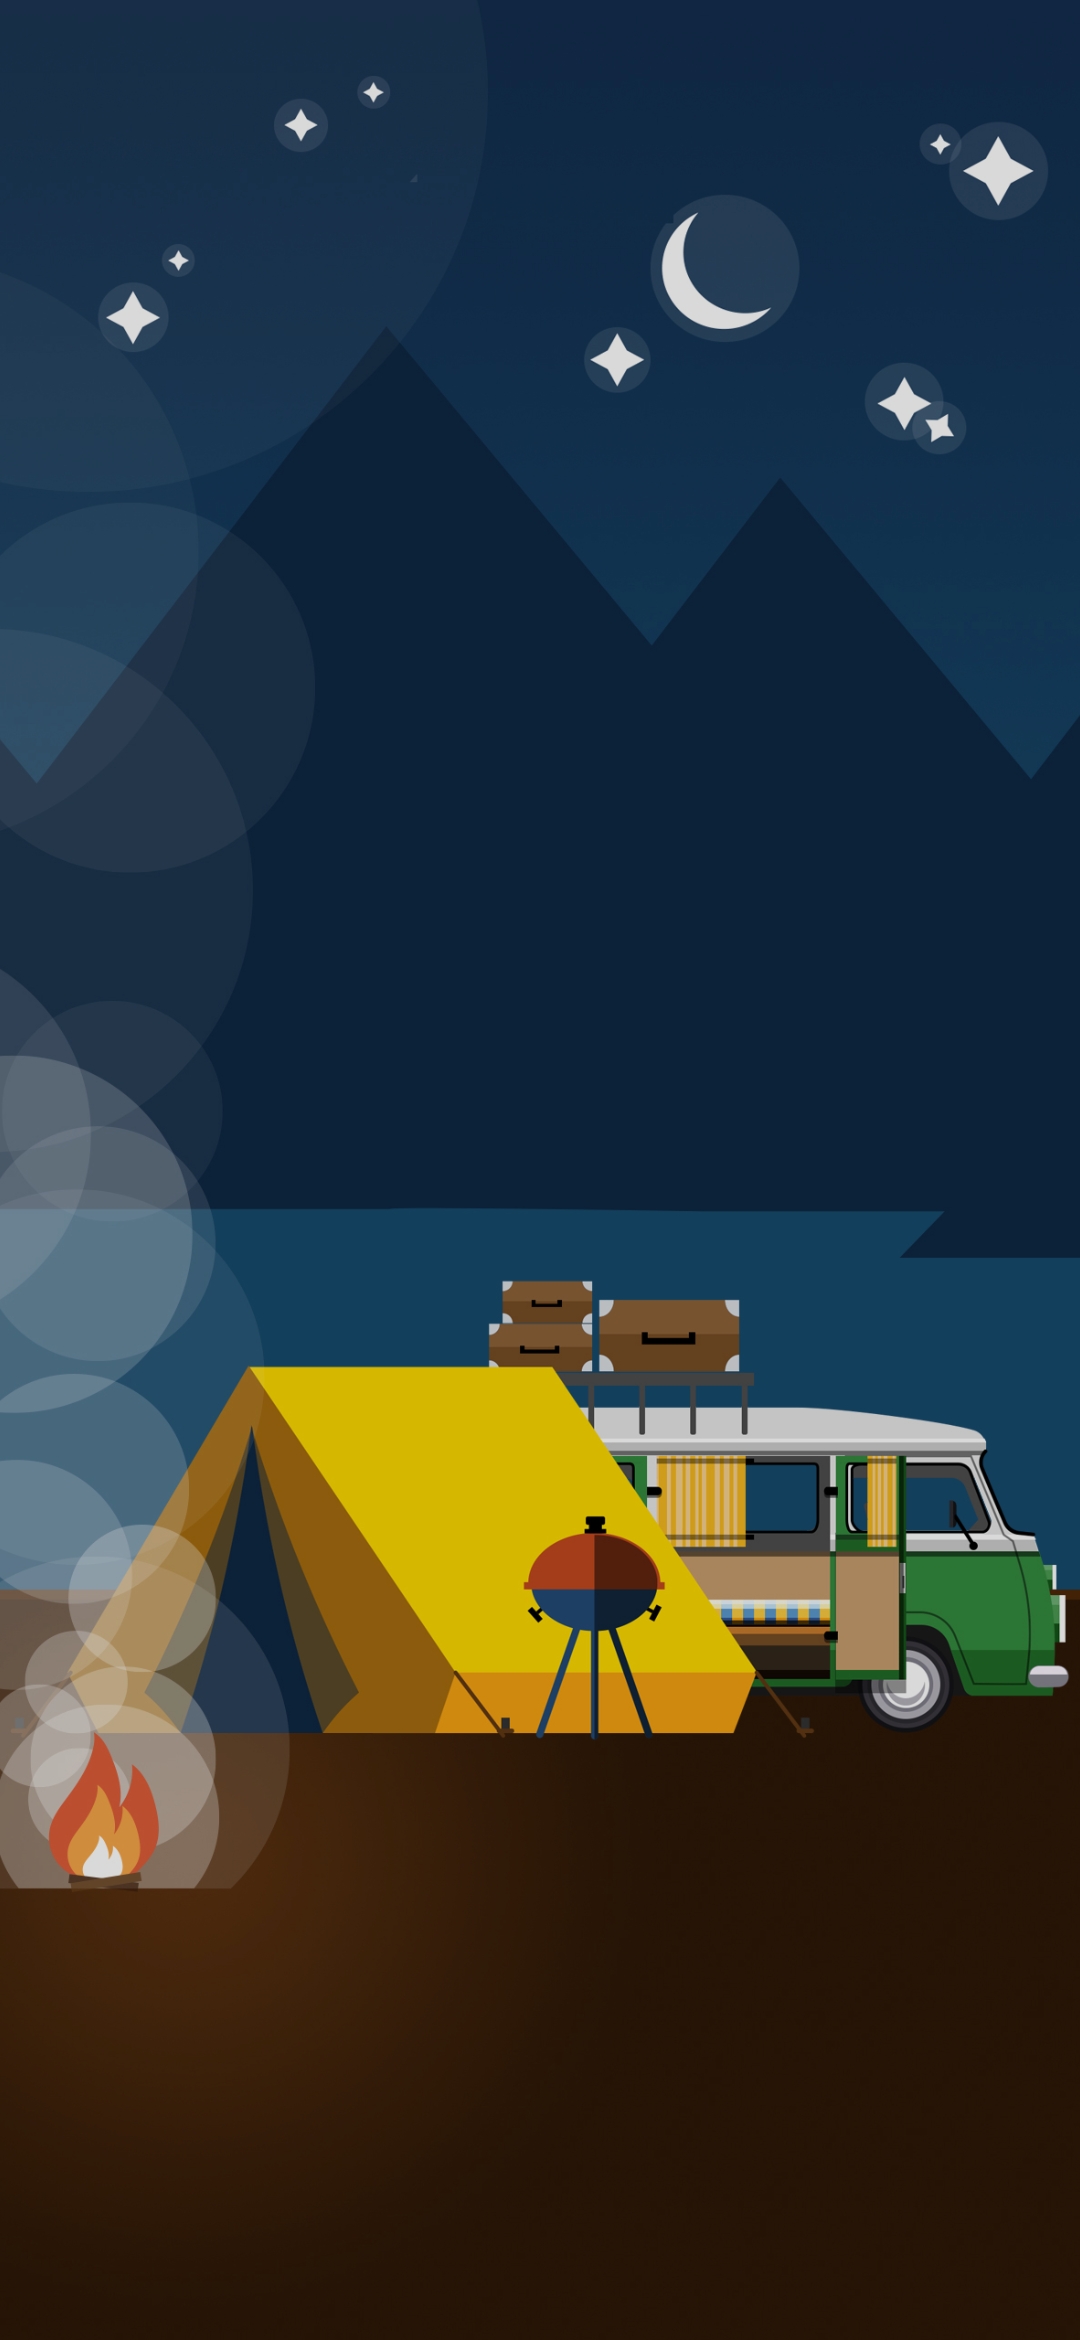 Illustration of a night camping